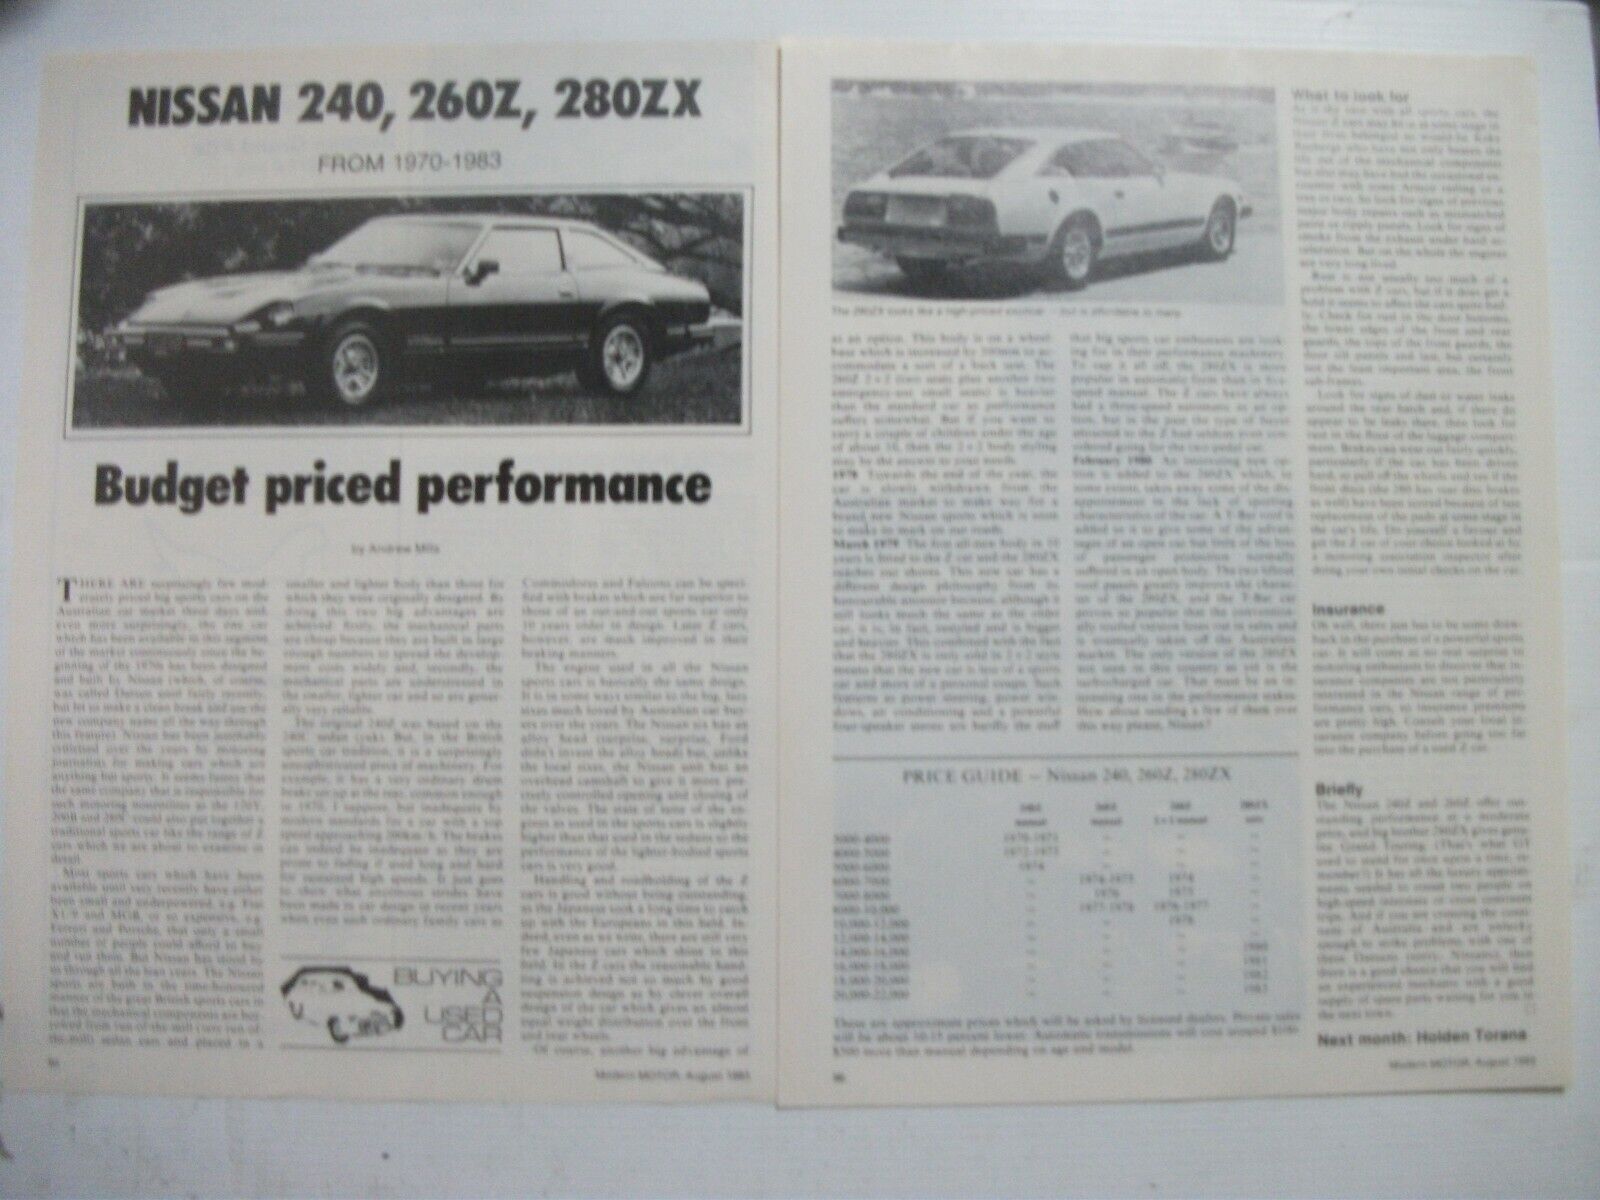 NISSAN DATSUN 240Z 260Z 280ZX FROM 1970 TO 1983 SECONDHAND CAR BUYING GUIDE